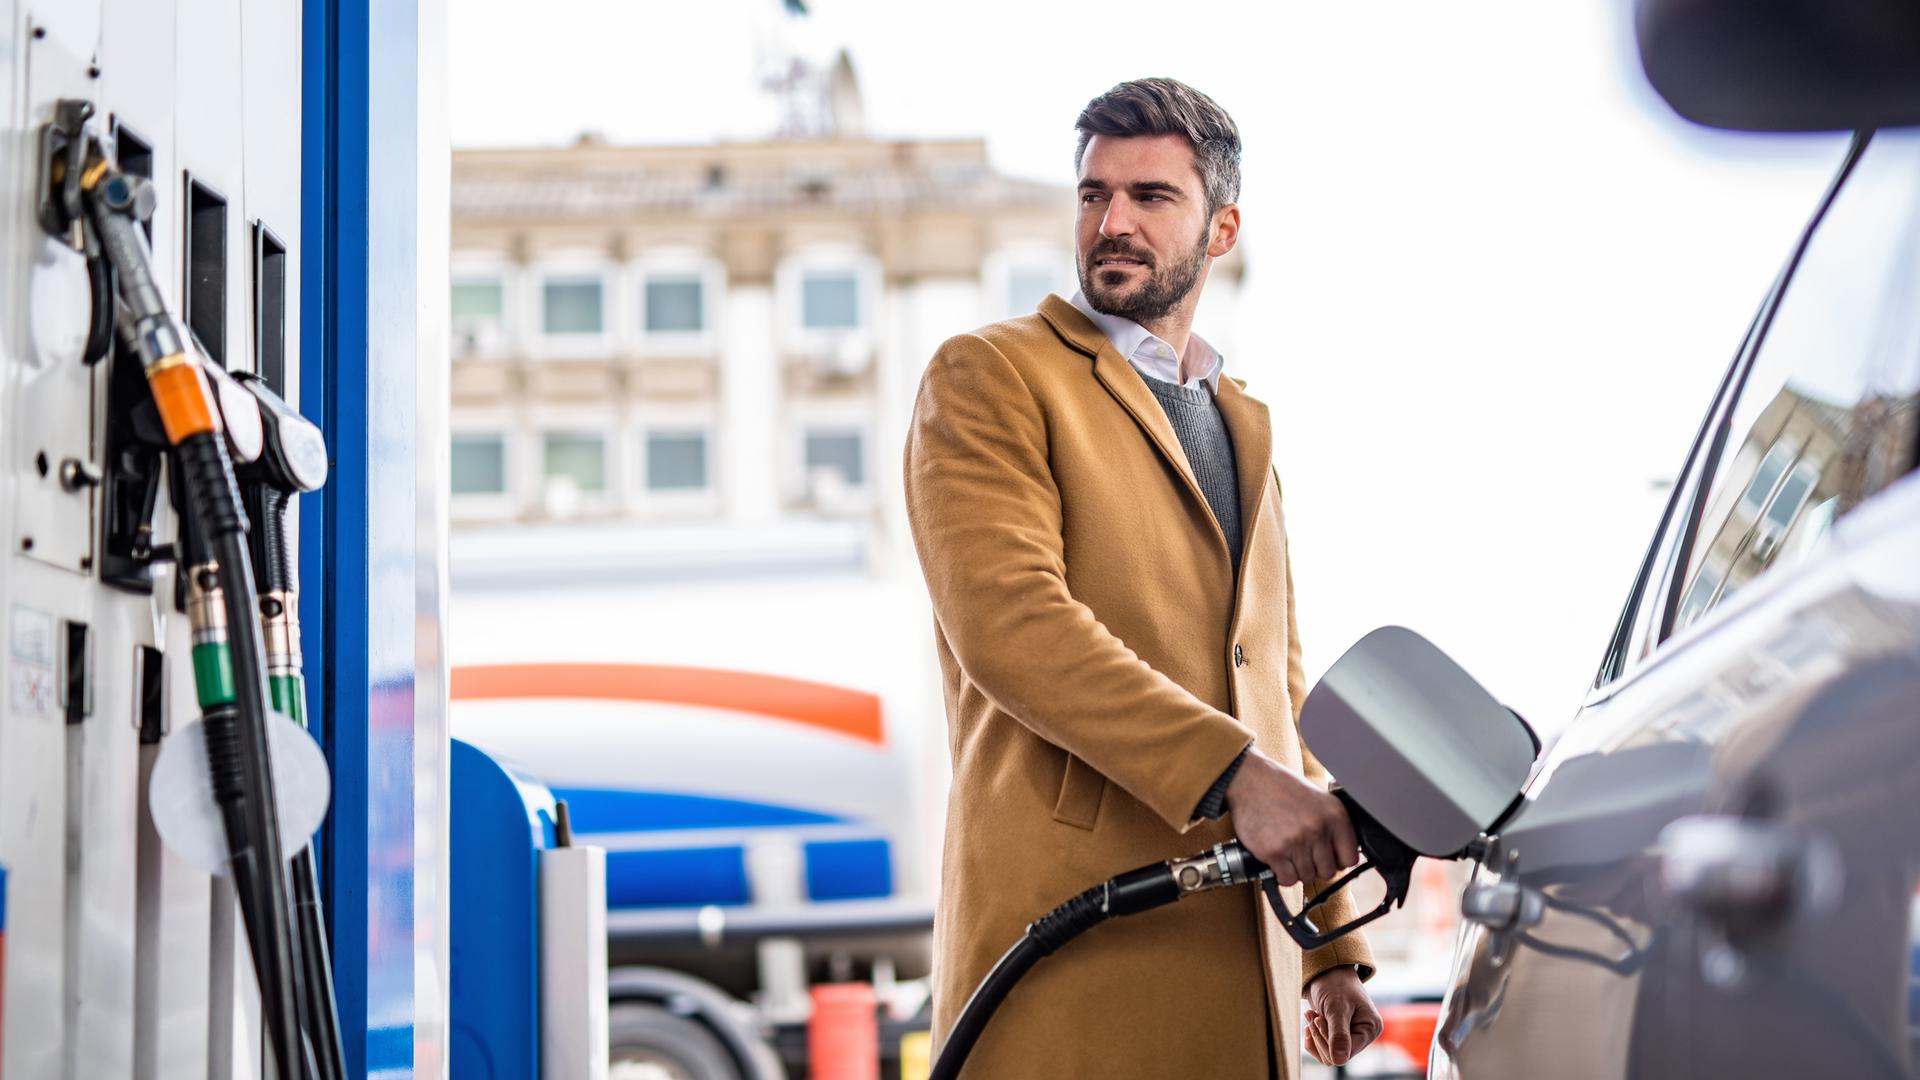 Elegant man refueling his car's tank at the gas station in the city.